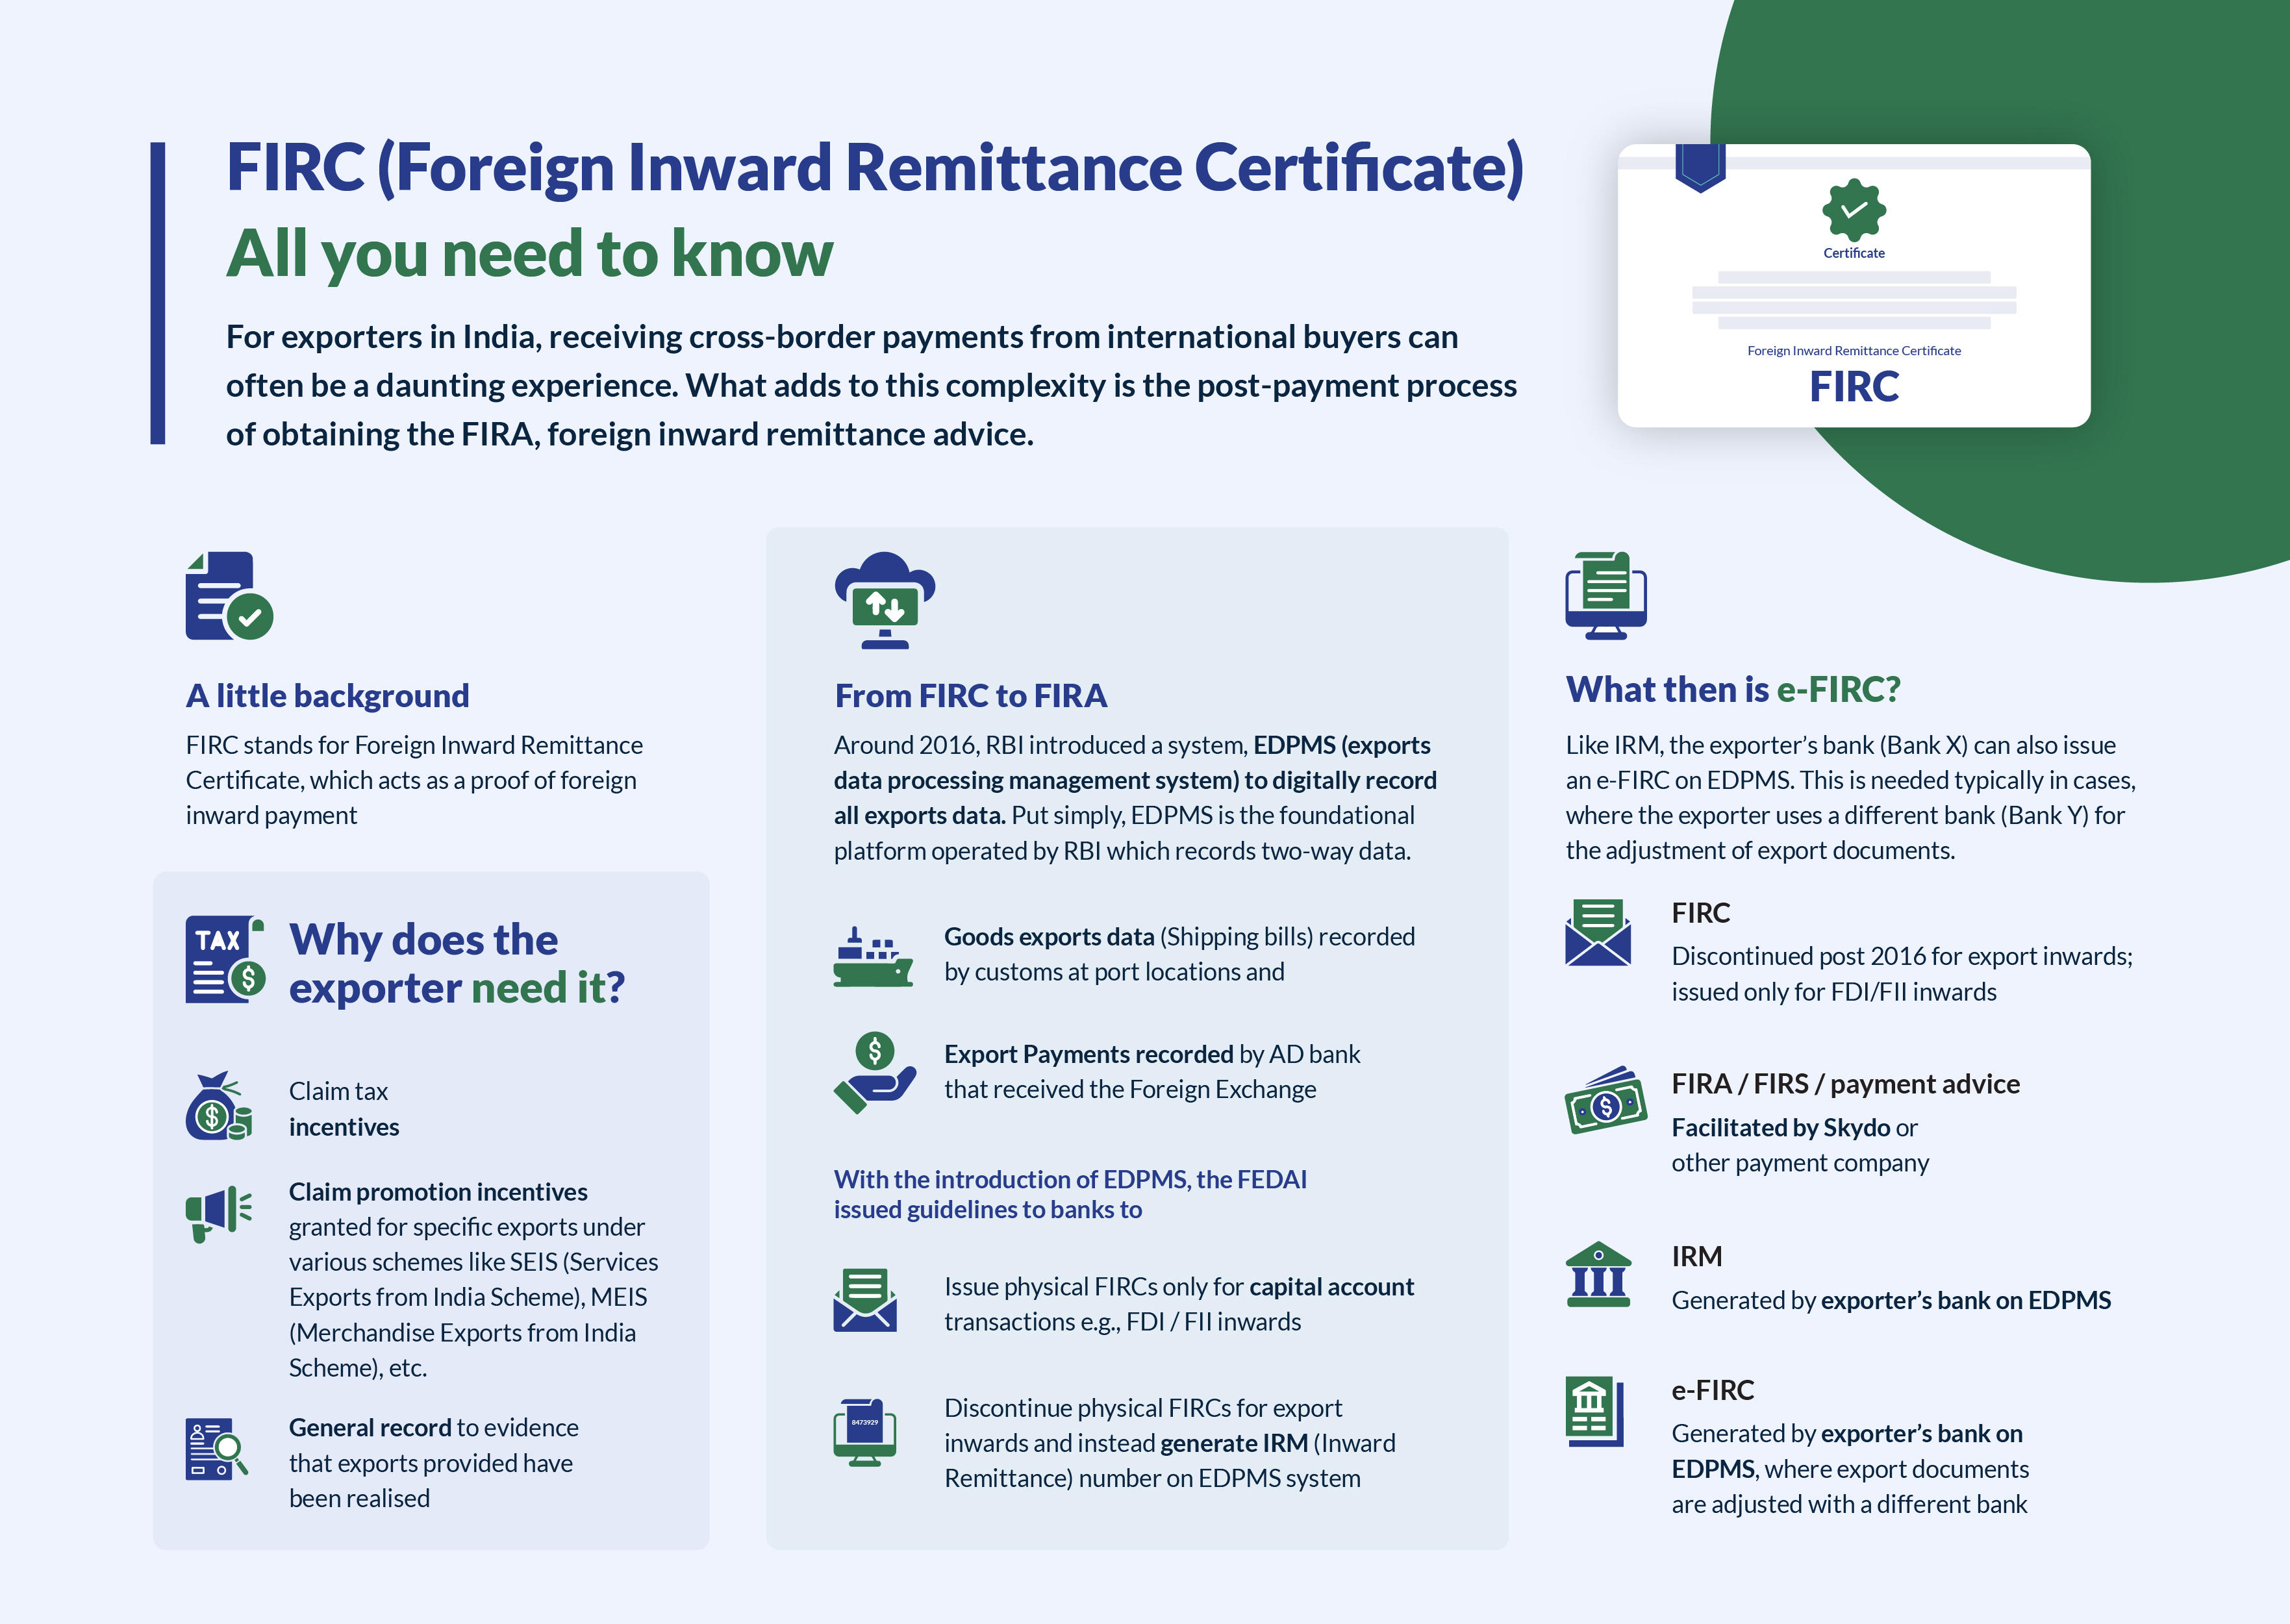 FIRC (Foreign Inward Remittance Certificate): All you need to know